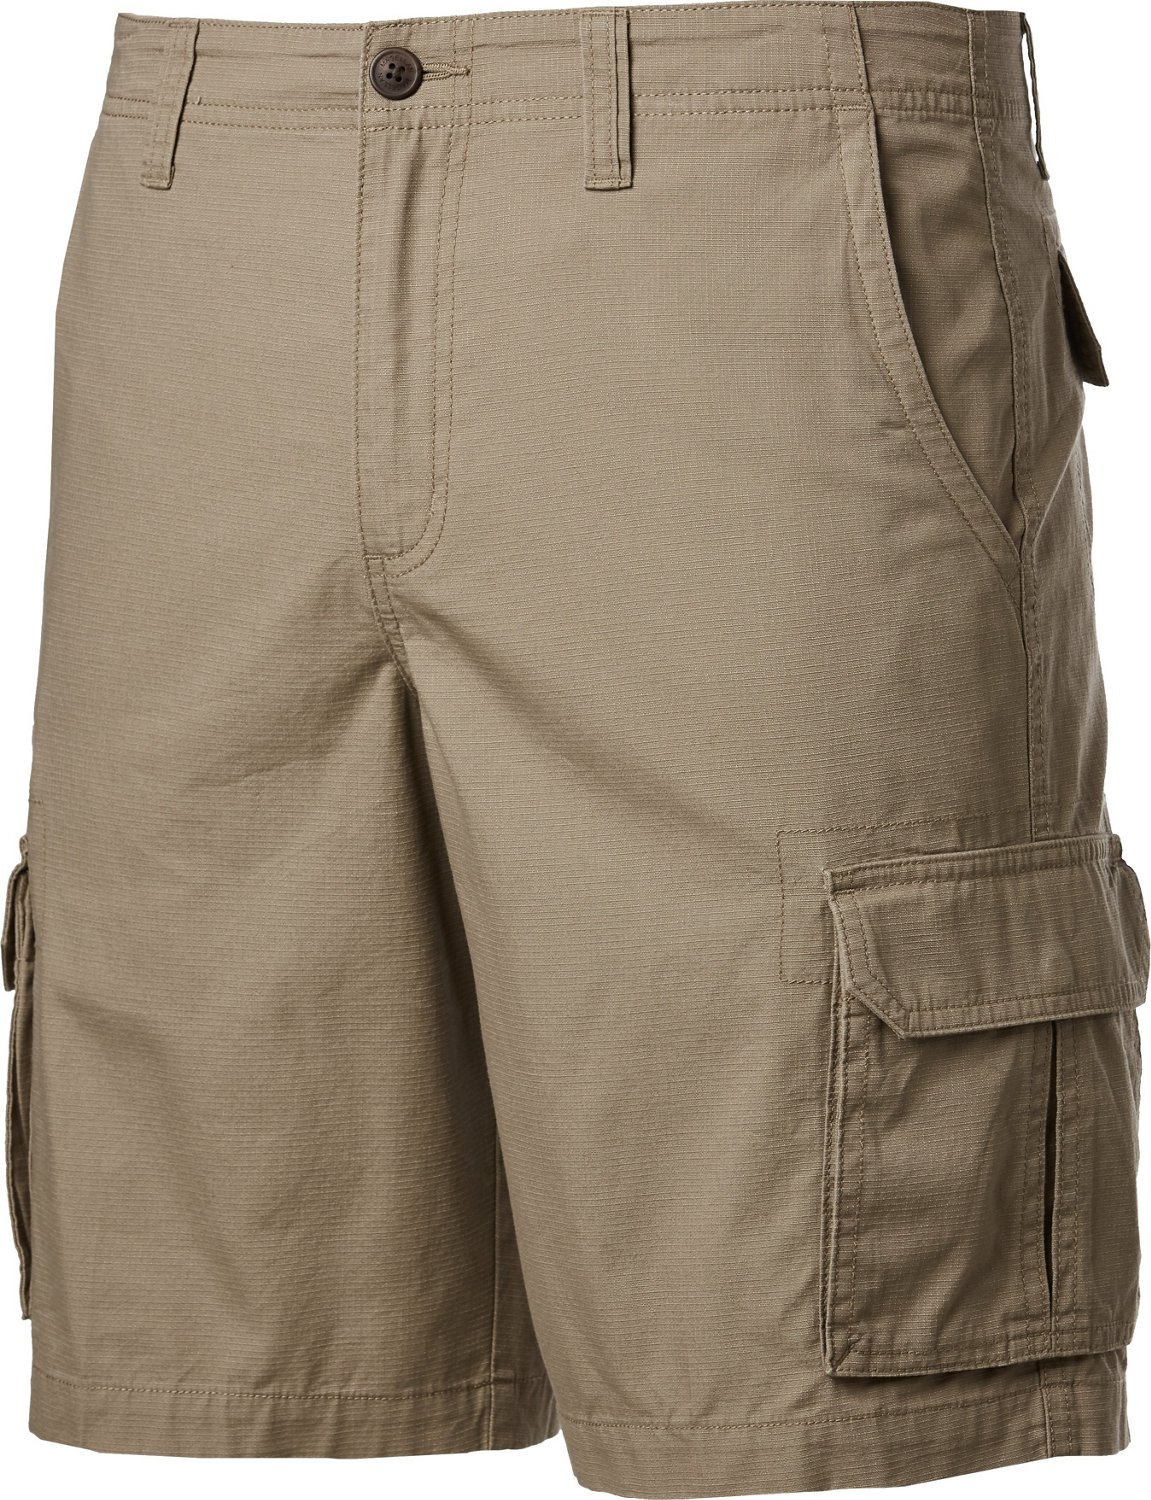 Magellan Men's Shorts 35 Olive Army Green Knee Length 4 Pockets New With  Tags 